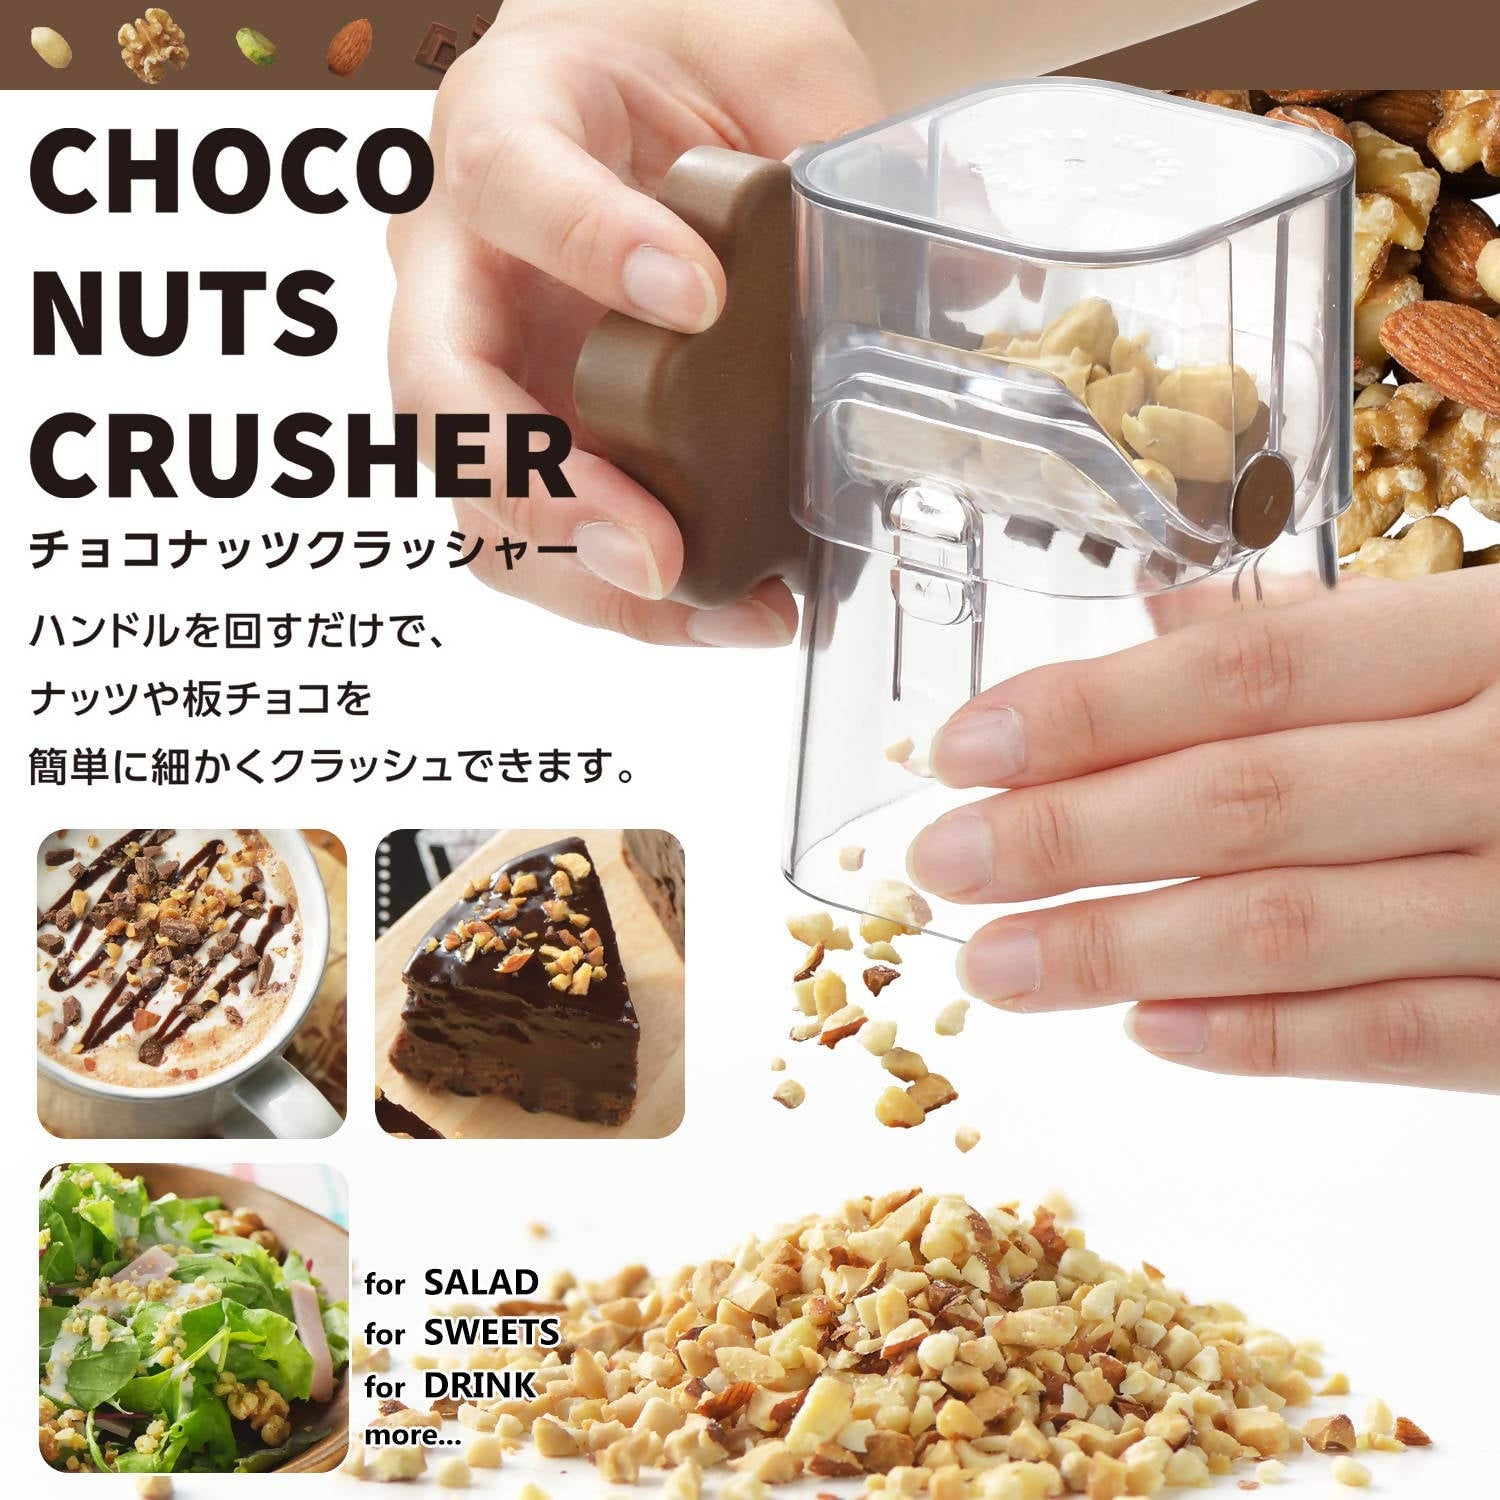 Choco Nut Crusher SE-2511 – New Japanese Invention Featured on NHK TV! –  Allegro Japan